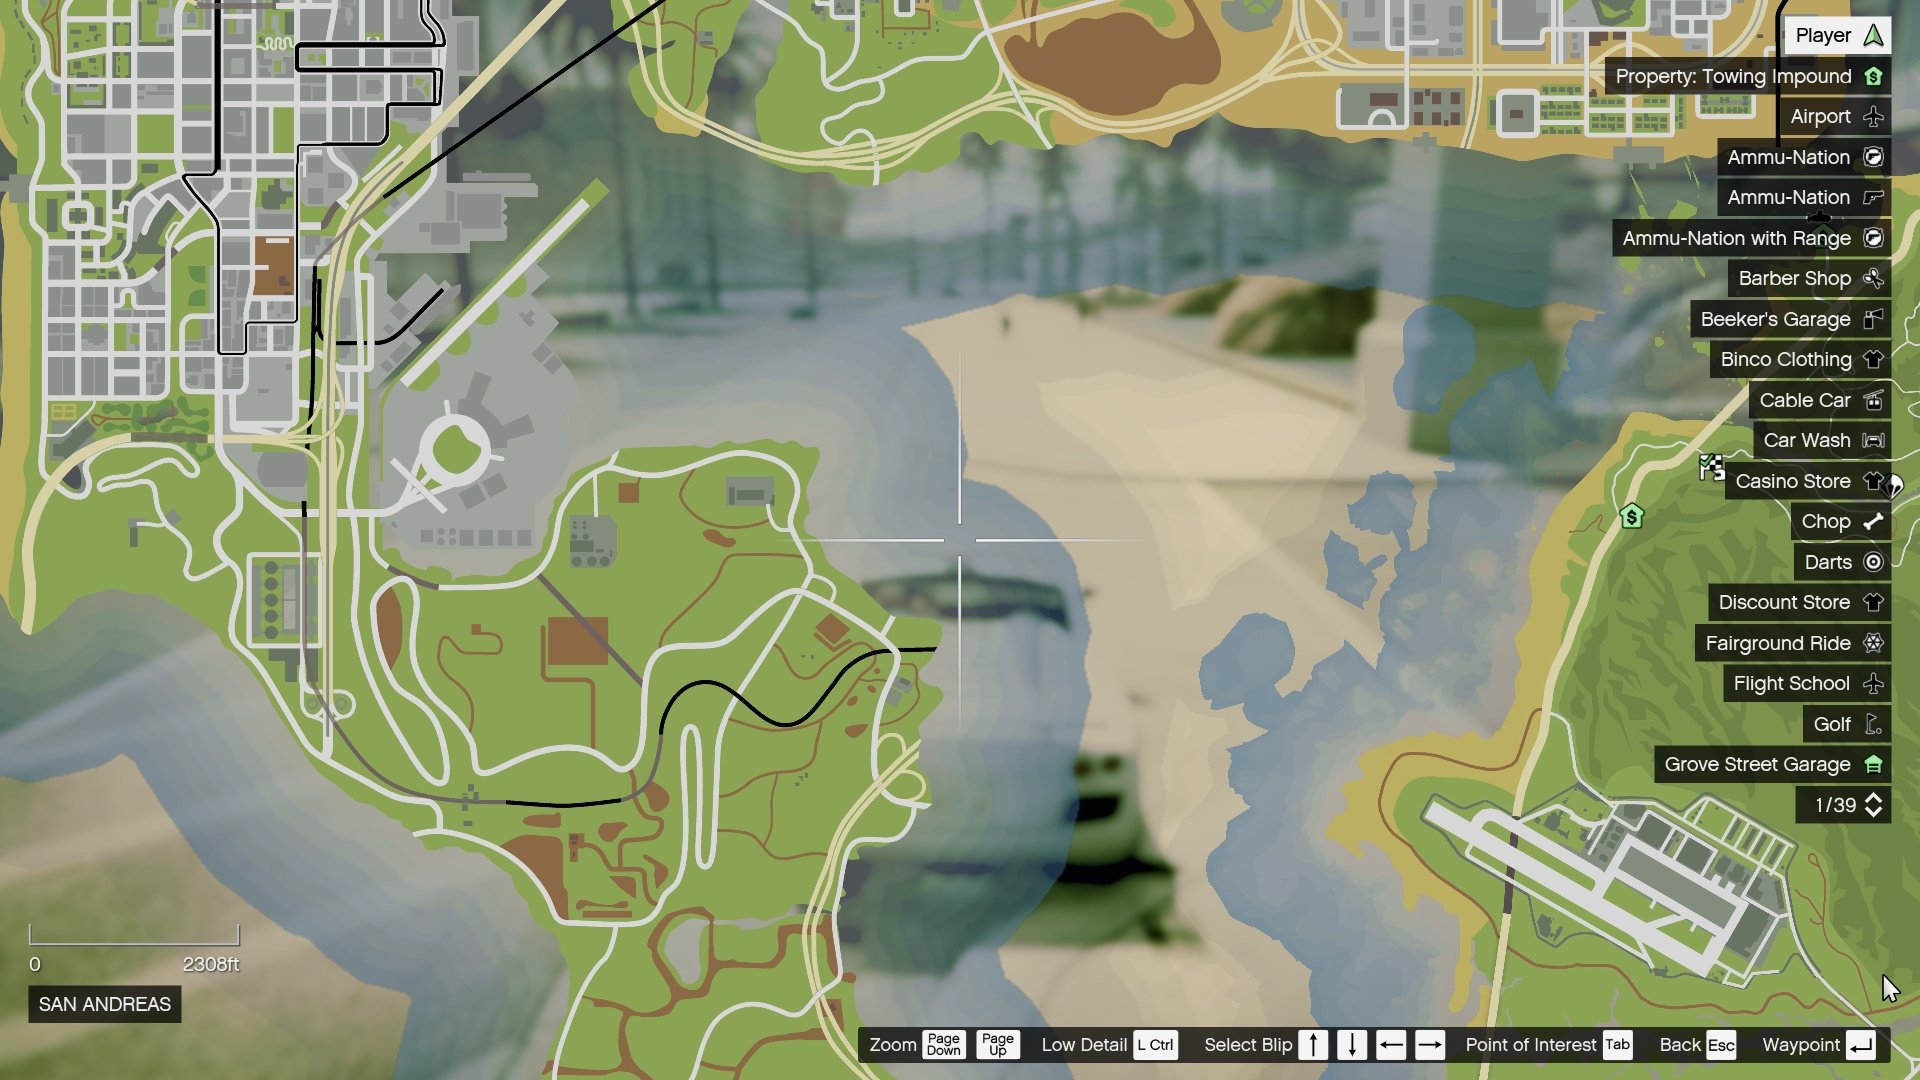 Recreated the San Andreas map with modern Los Santos (GTA V map